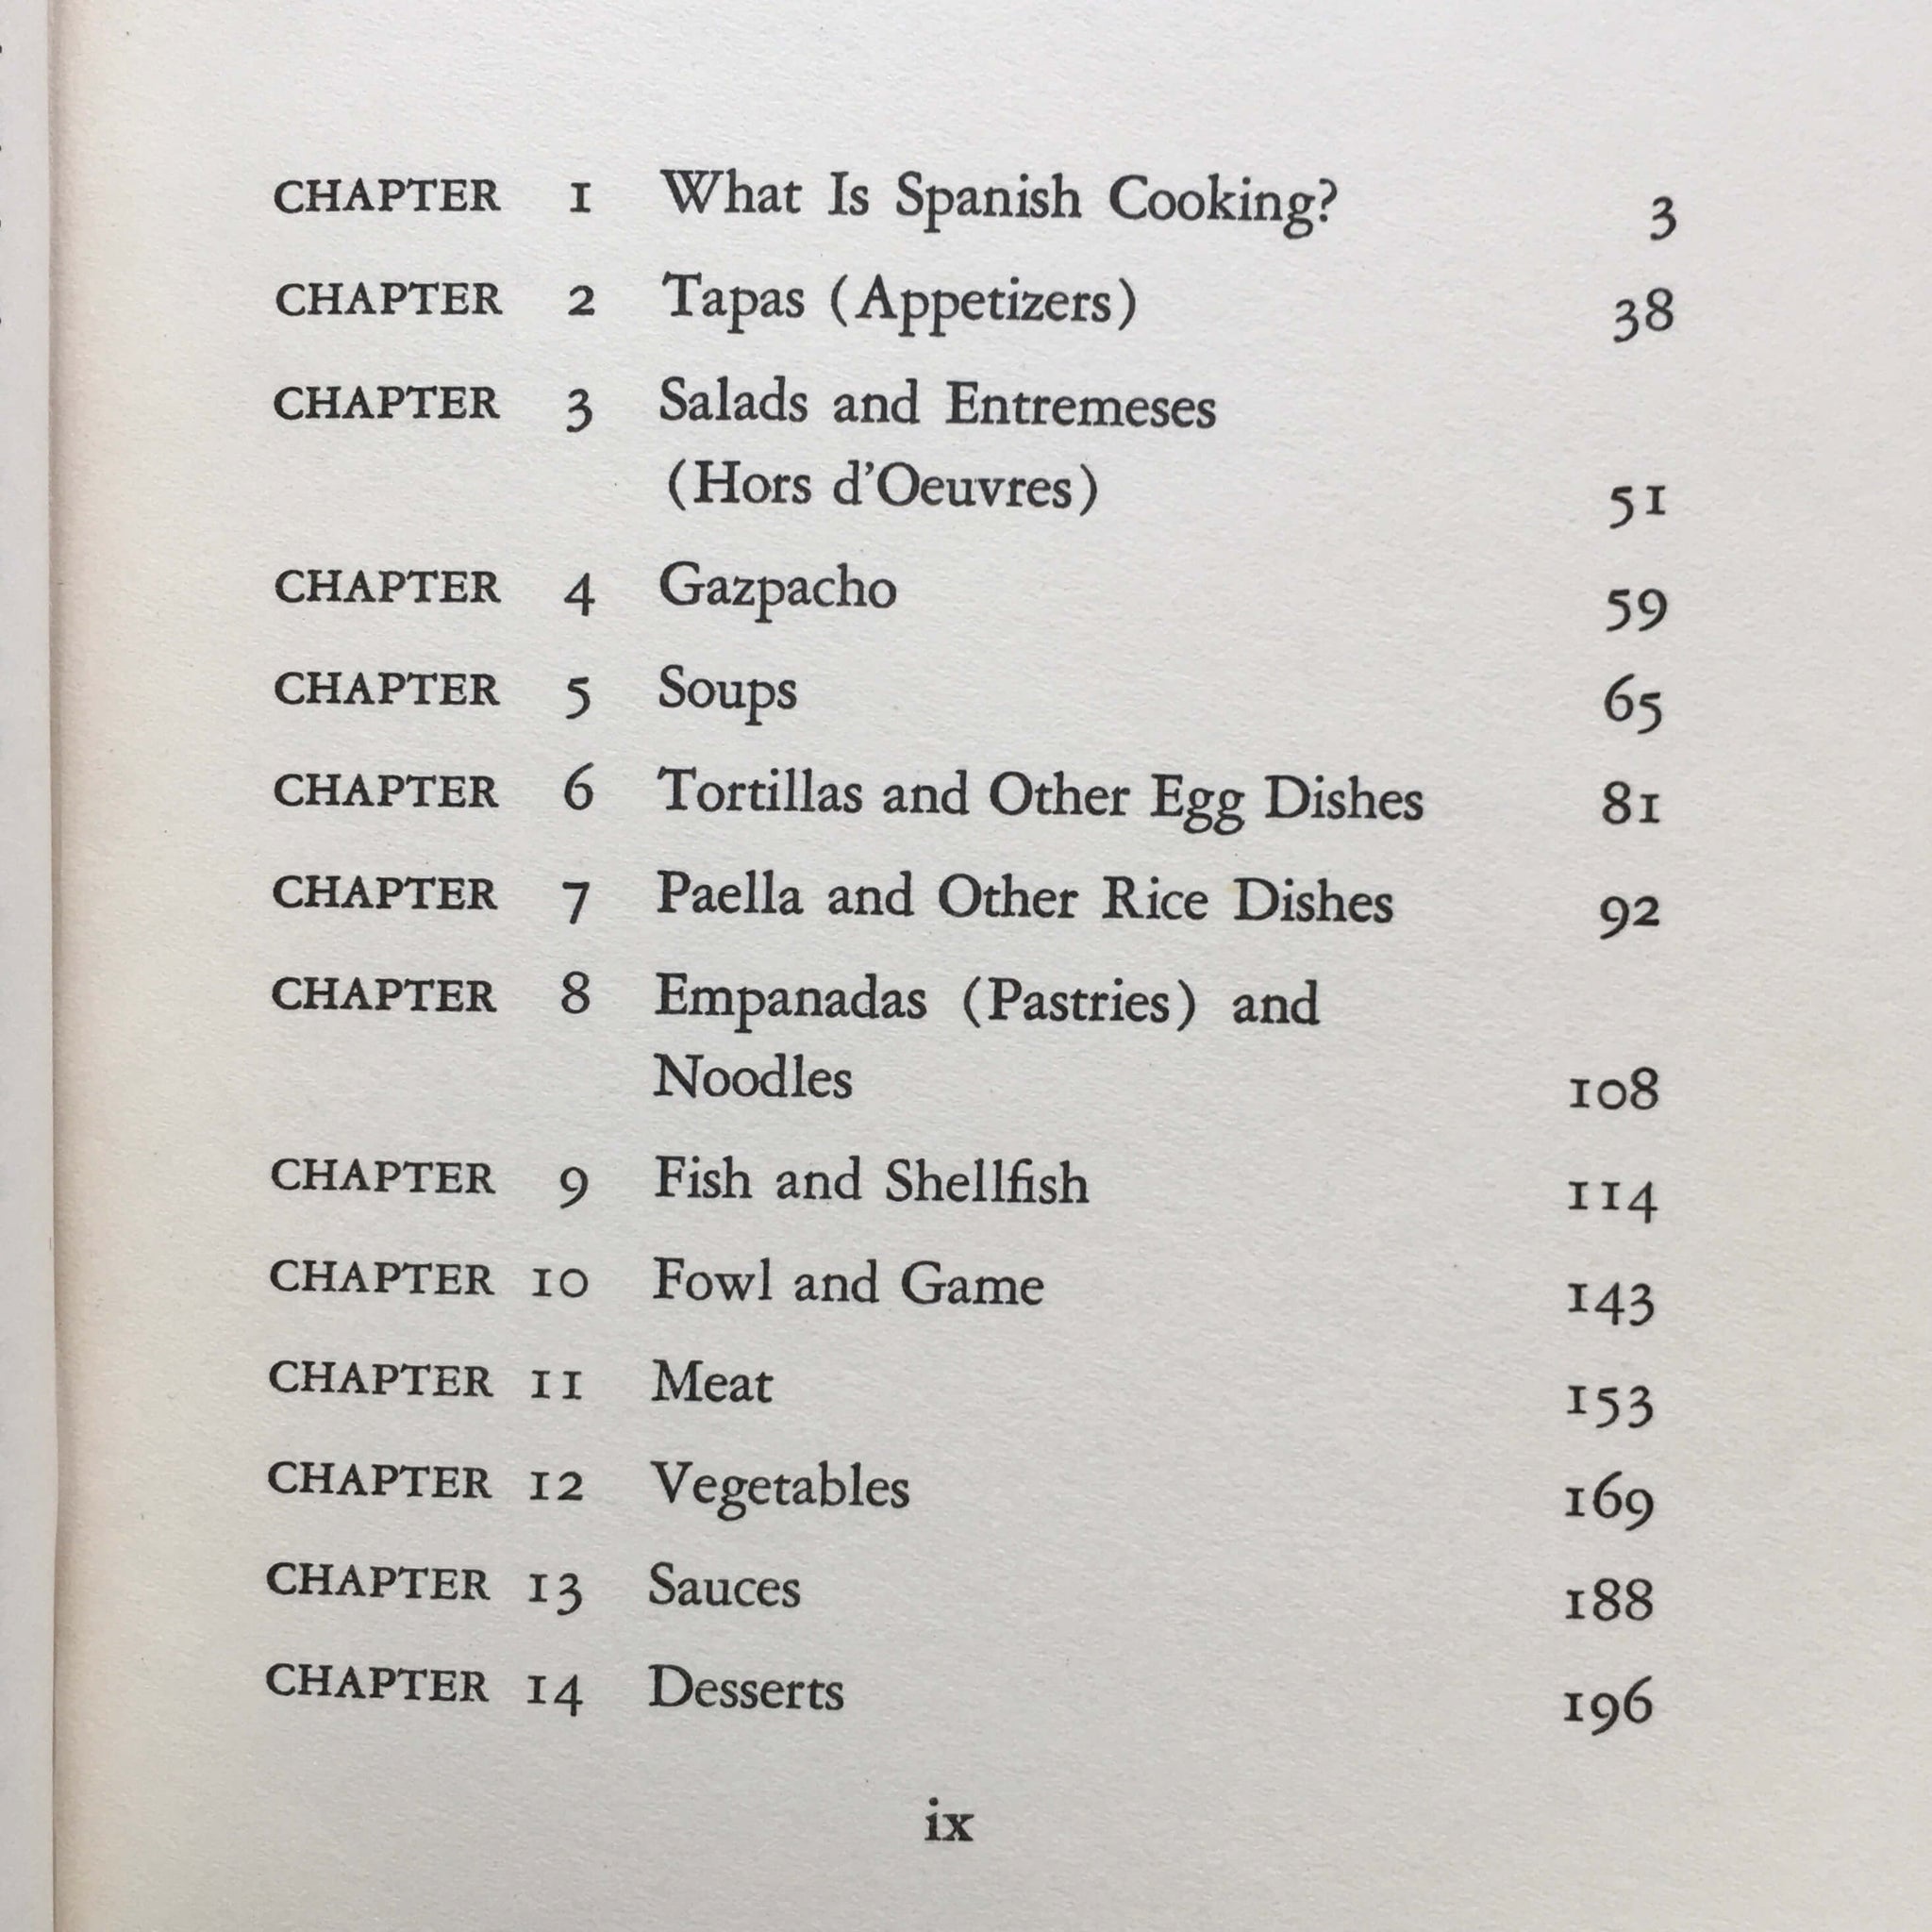 The Spanish Cookbook - Barbara Norman - 1966 First Edition - Traditional Foods of Spain